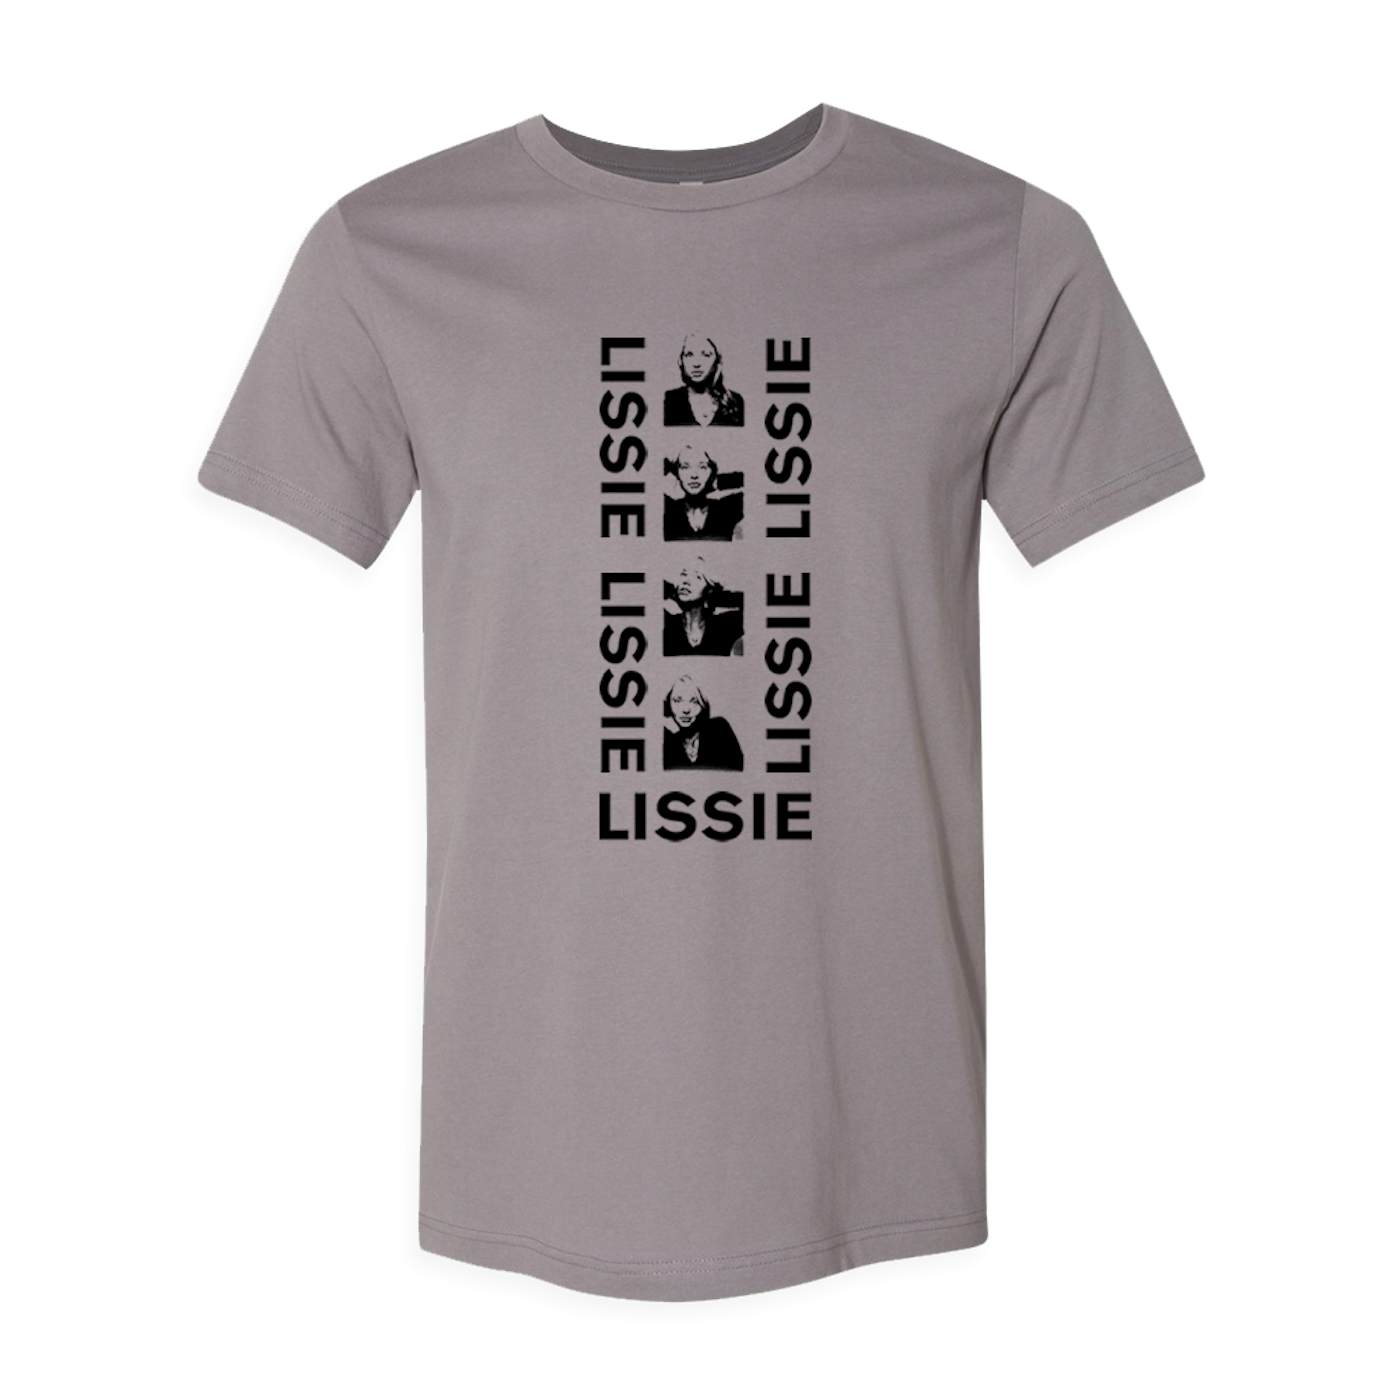 Lissie PHOTO BOOTH T-SHIRT GREY